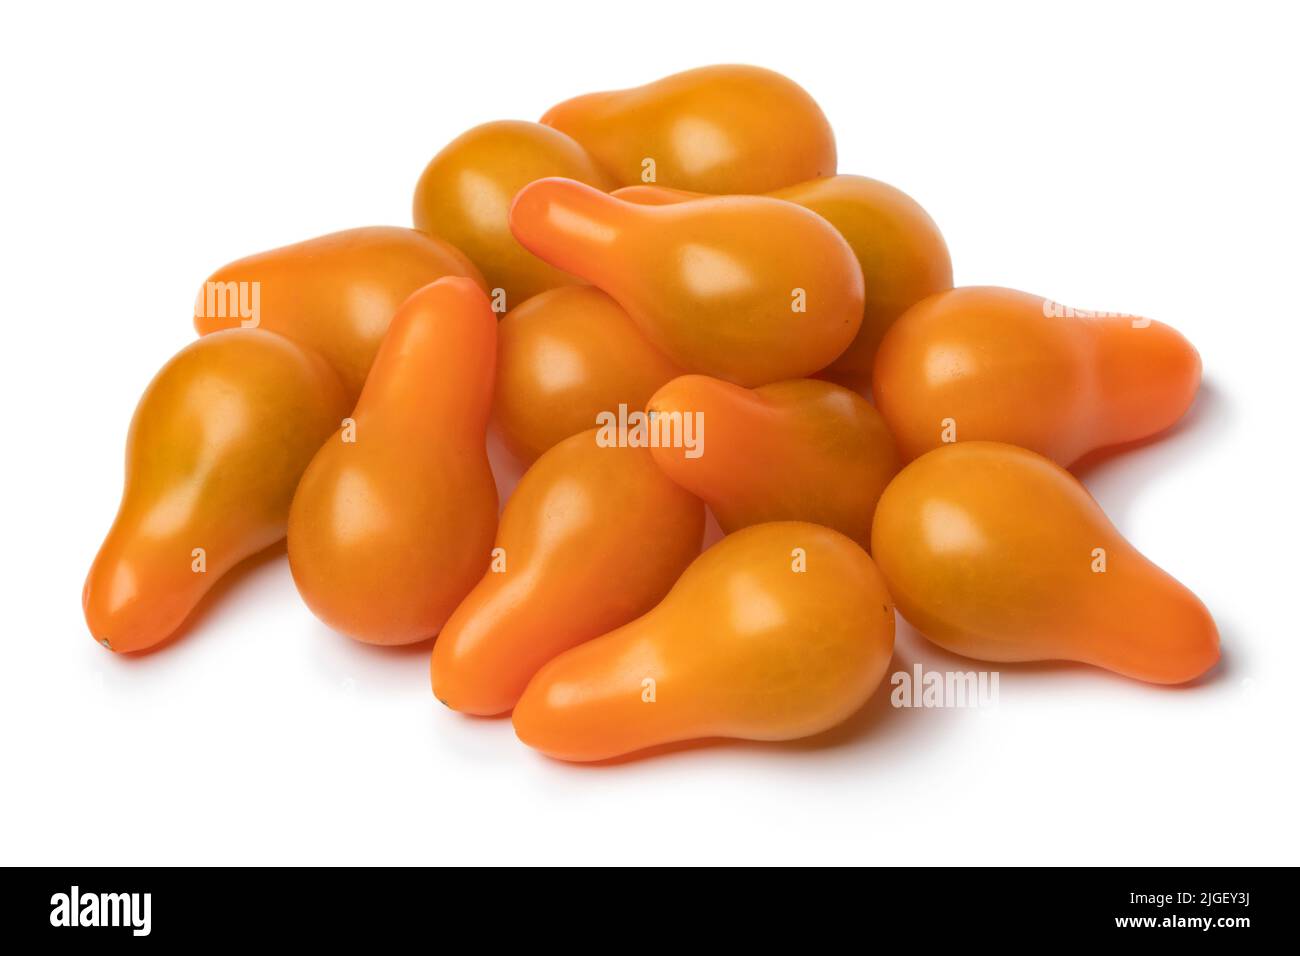 Heap of yellow whole pear tomatoes isolated on white background  close up Stock Photo